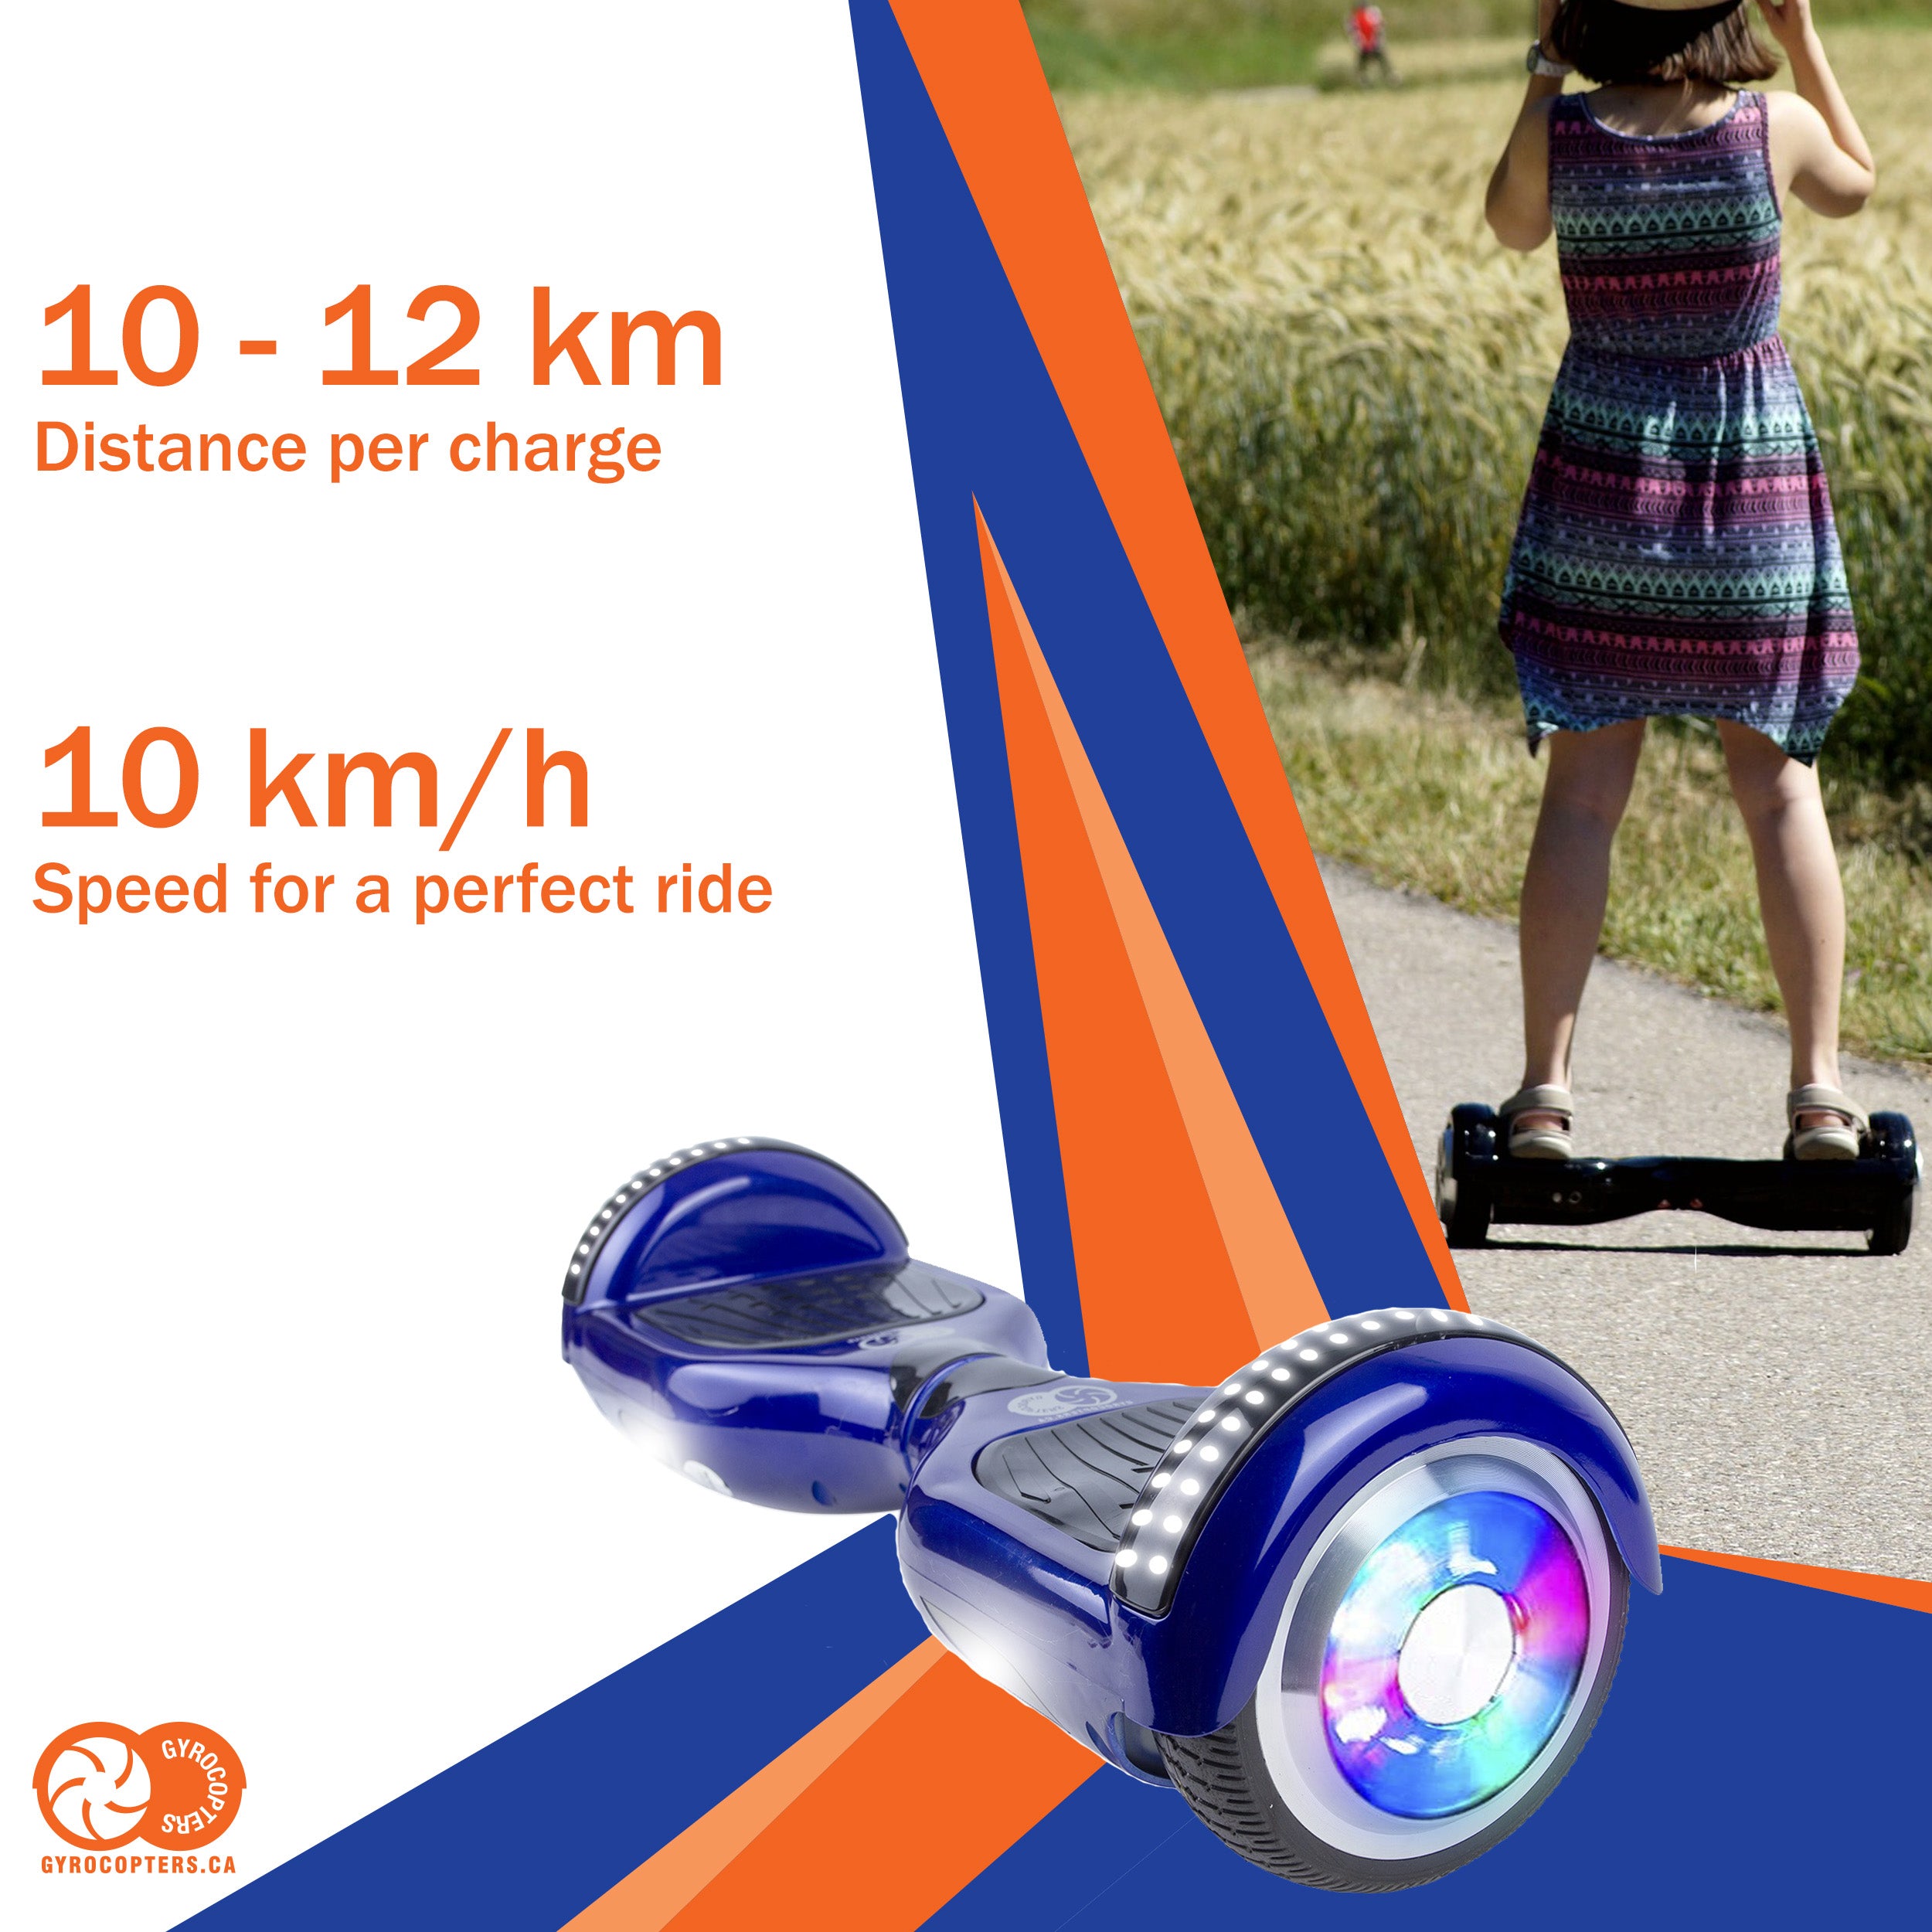 Gyrocopters Hoverboard with bluetooth speaker, hoverboard with led lights, cheap hoverboard with bluetooth, cheap hoverboard in toronto, safe hoverboard, Gyrocopters pro 4.0 hoverboards, pro 4.0 hoverboards, blue hoverboards